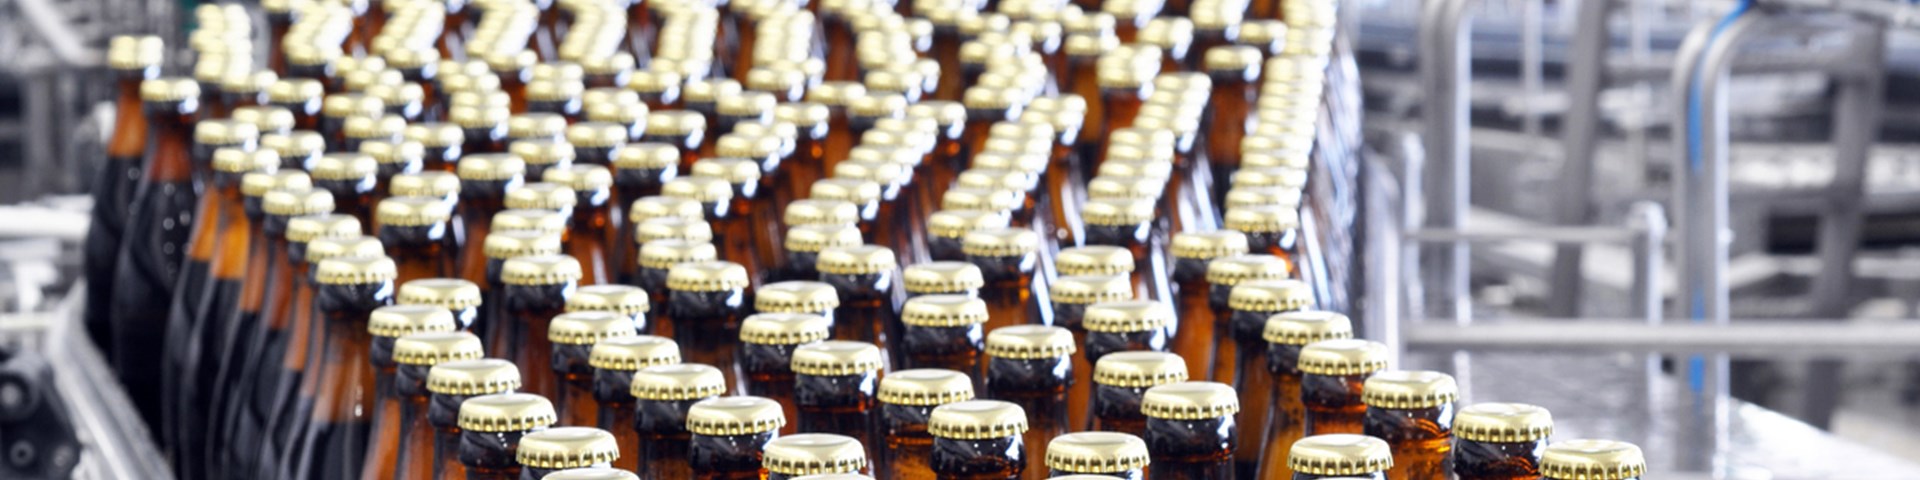 Bottles of beer being mass produced in factory